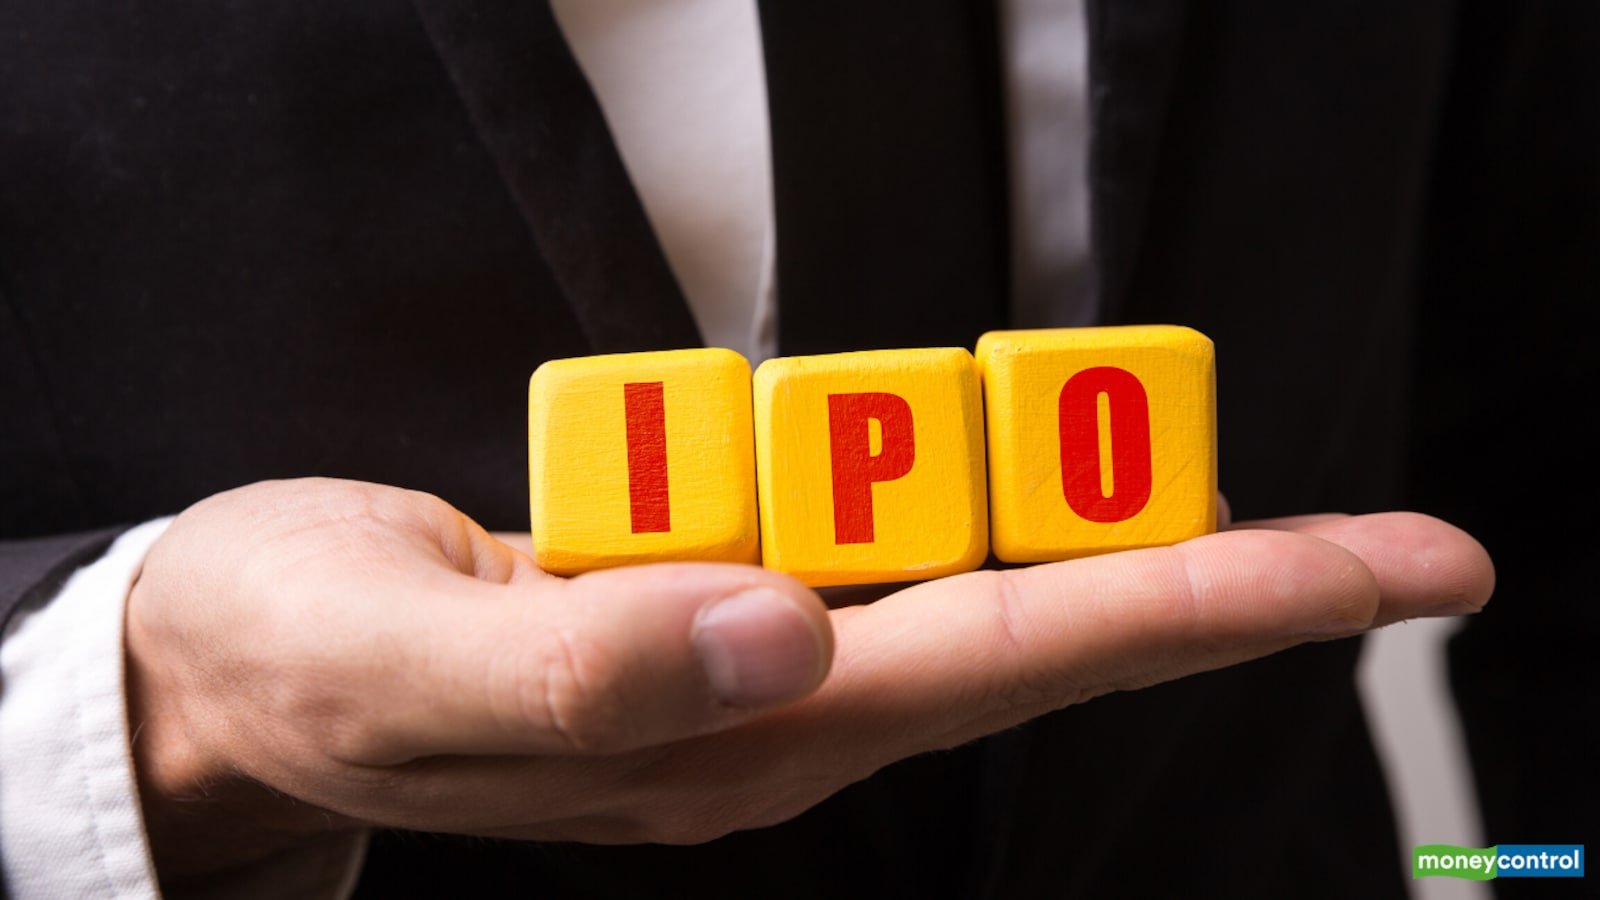 pe-funds-seek-alternatives-to-exits-amid-tough-ipo-market